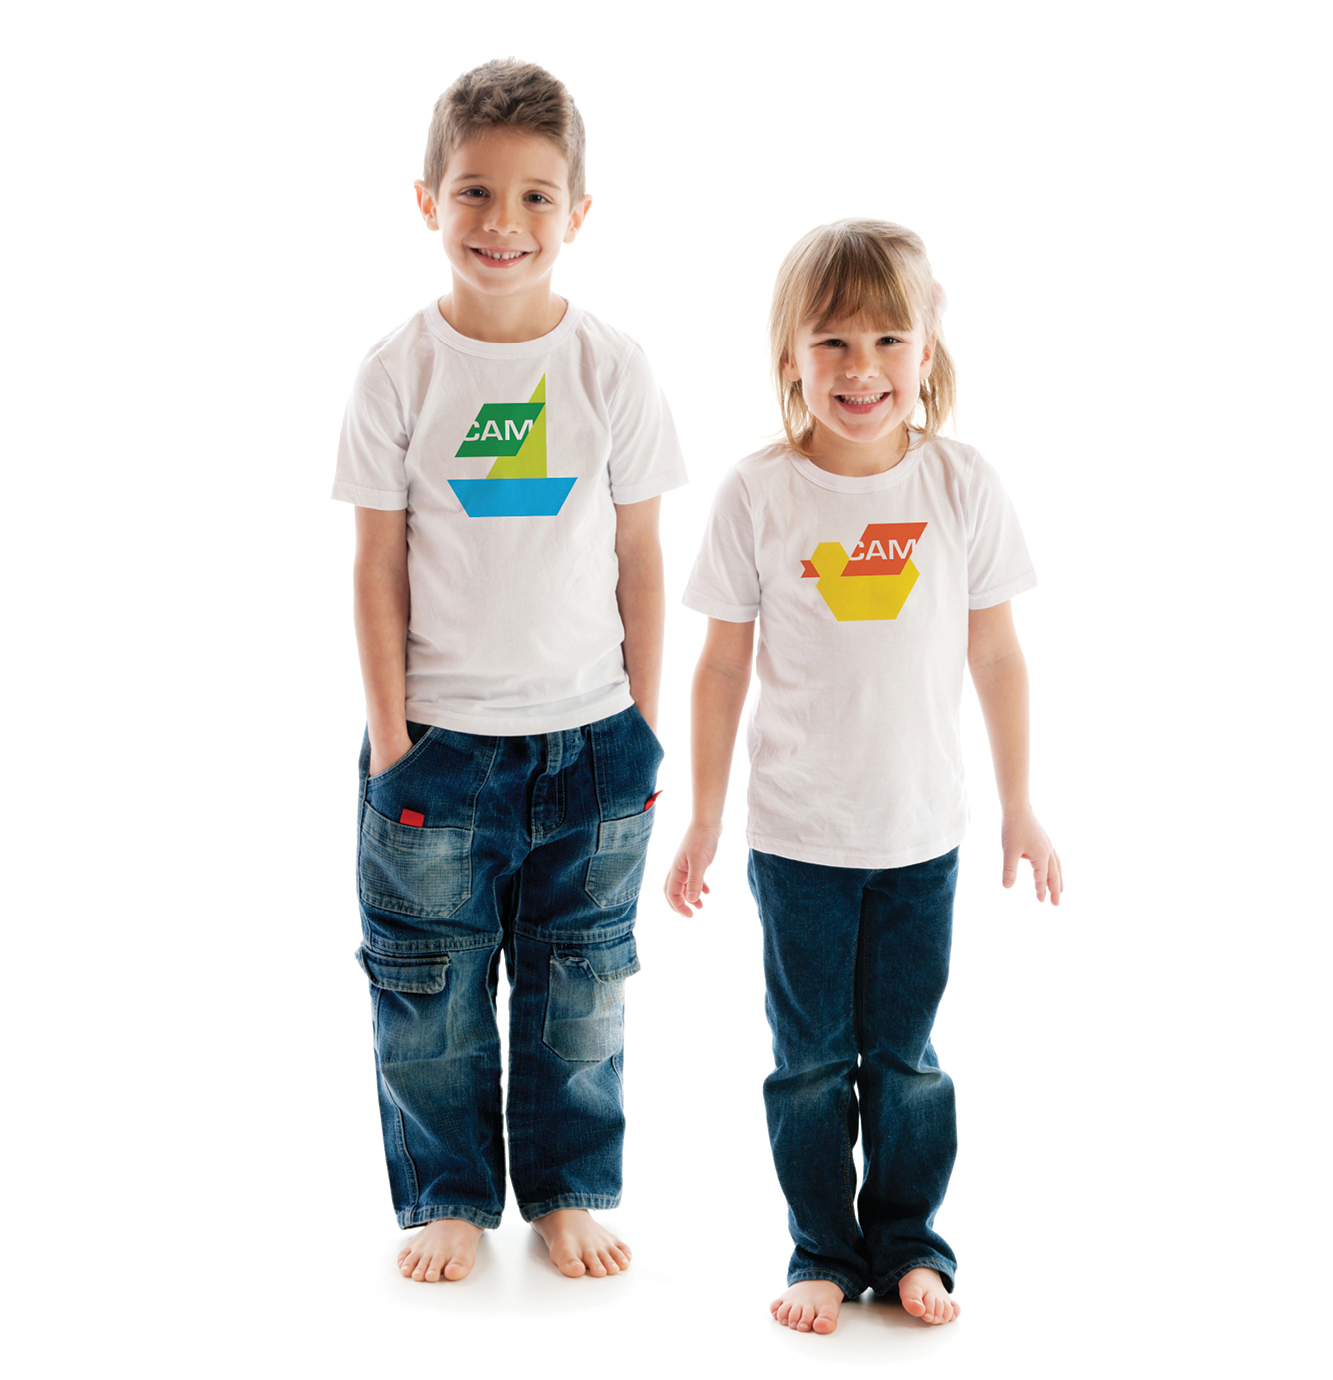 Contemporary Art Museum St. Louis t-shirts for kids